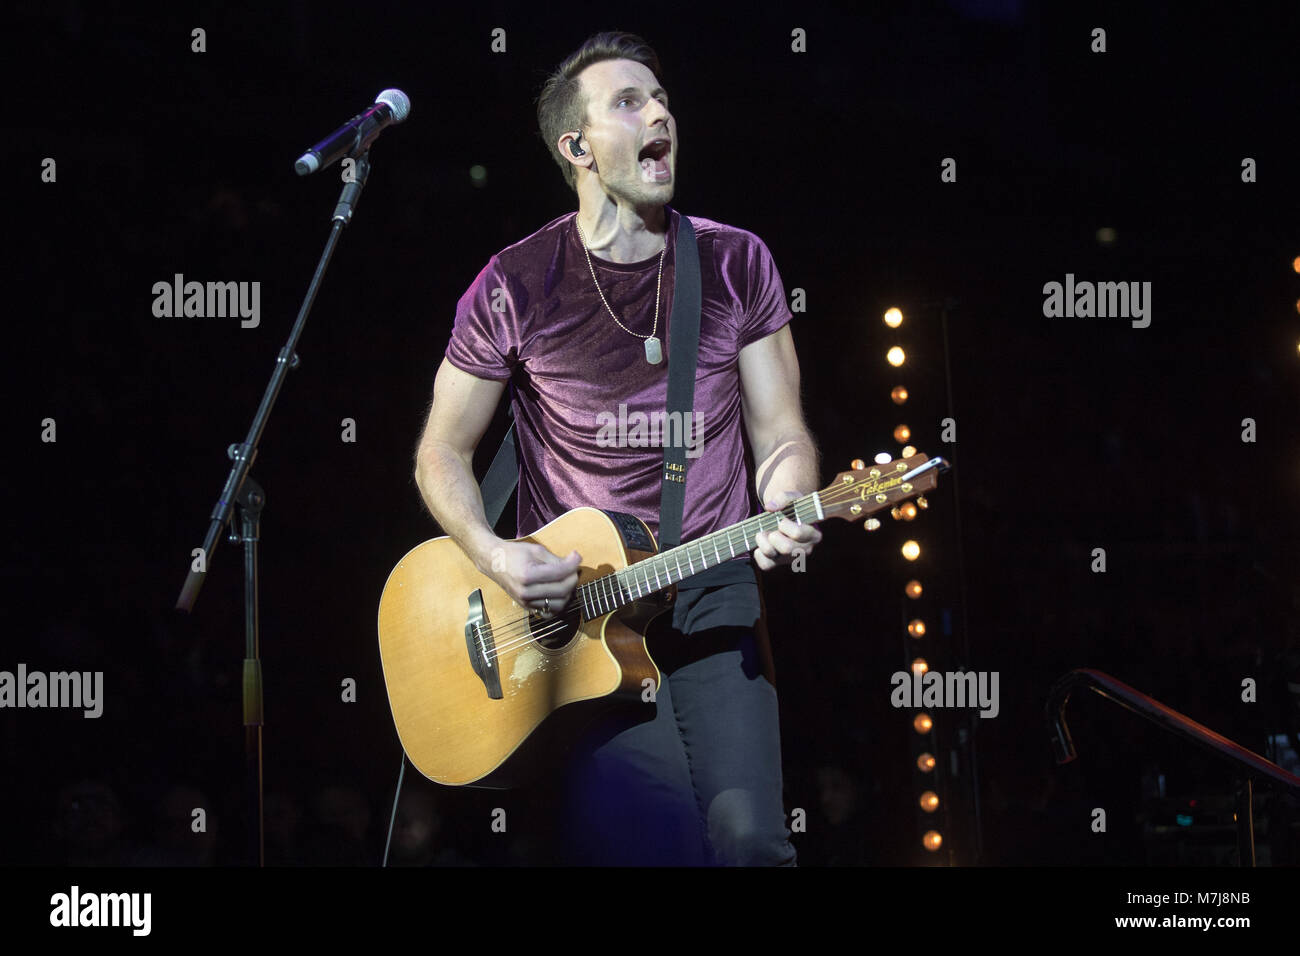 London, England. 11th March 2018,  Russell Dickerson preforming  During Country To Country  at The O2 Arena on March 11th, 2018, London. England.© Jason Richardson / Alamy Live News Stock Photo